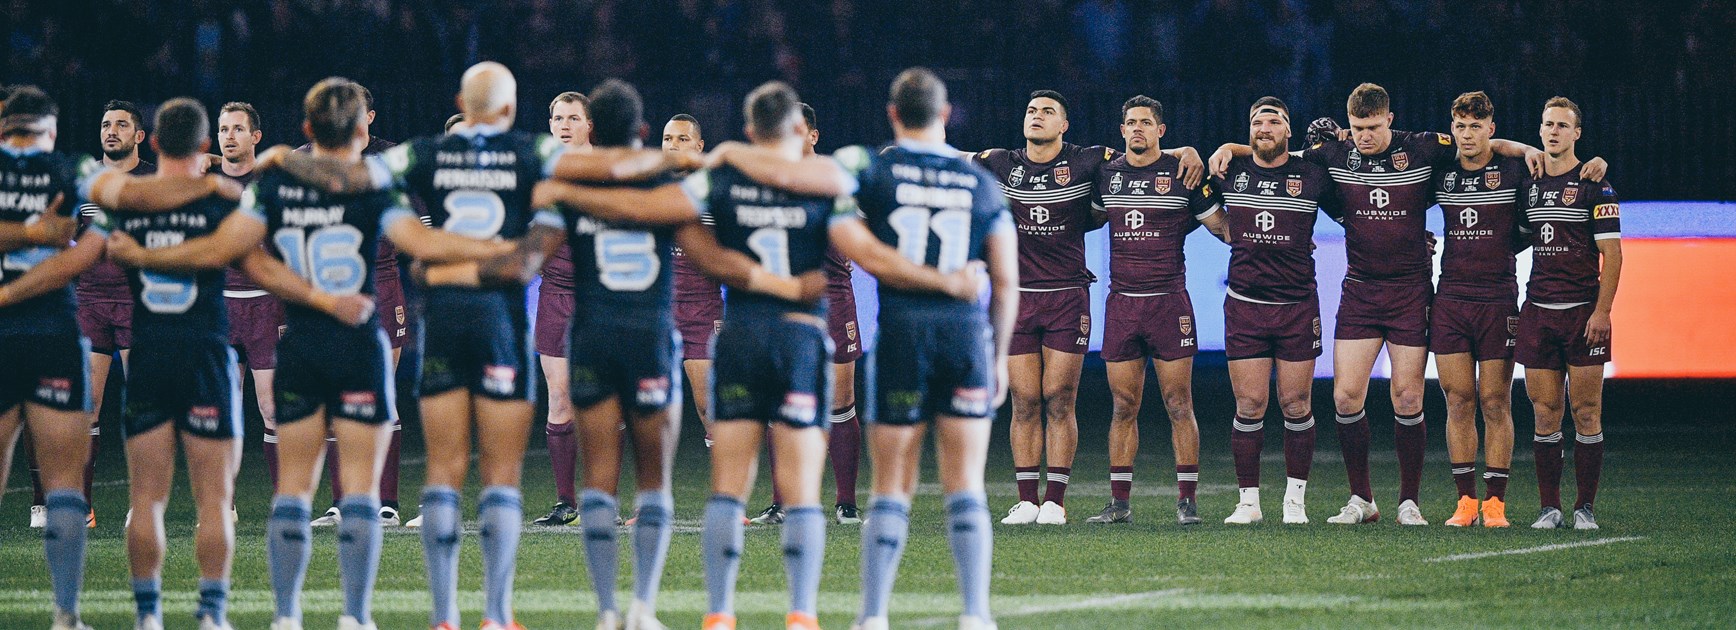 Adelaide to host first game: 2020 State of Origin scheduled announced